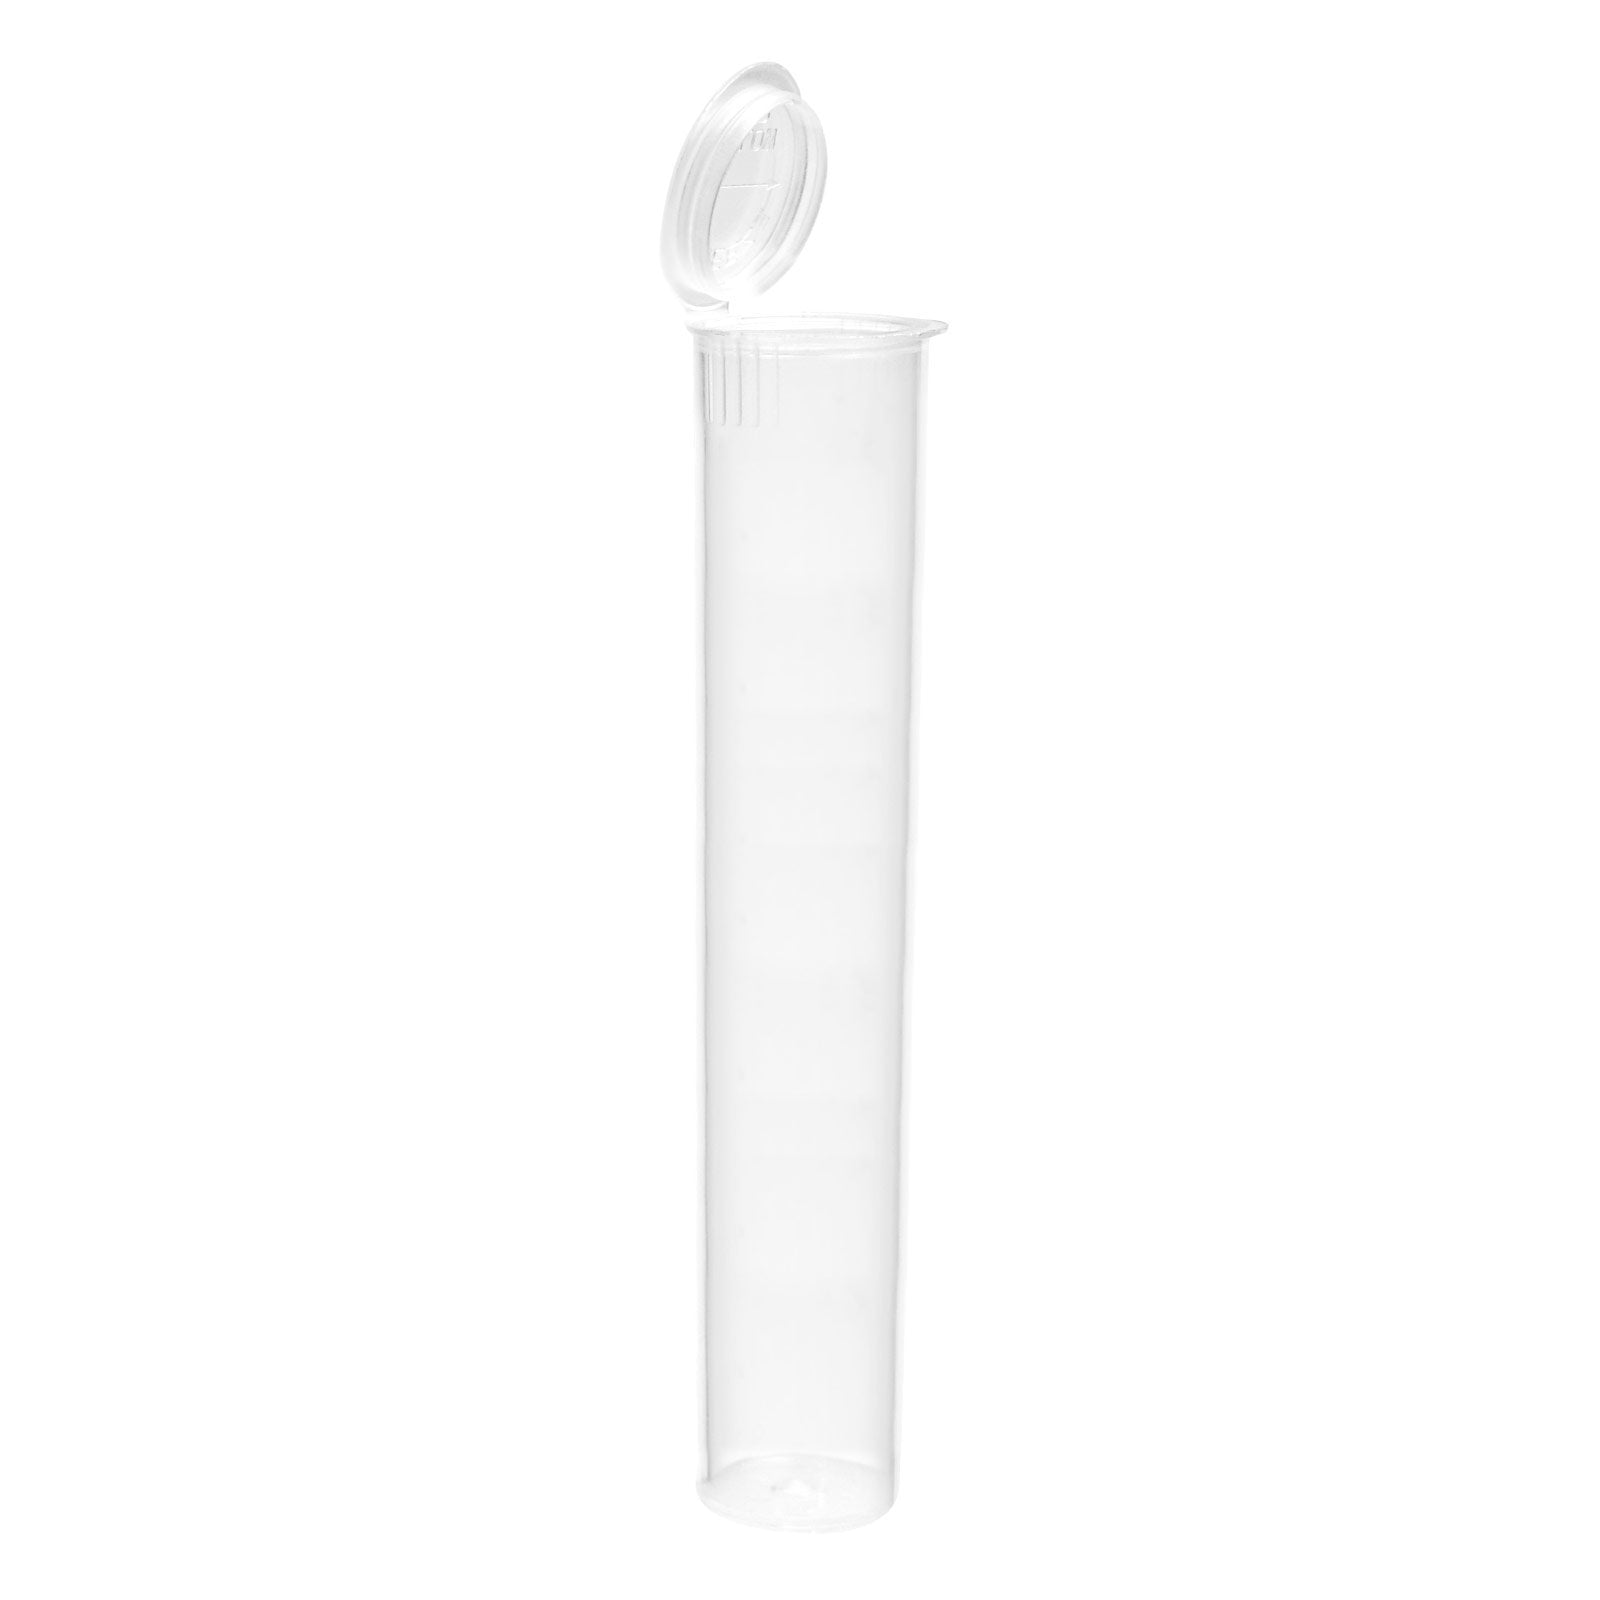 120mm Rx Squeeze Tubes Translucent Clear - 1 Count